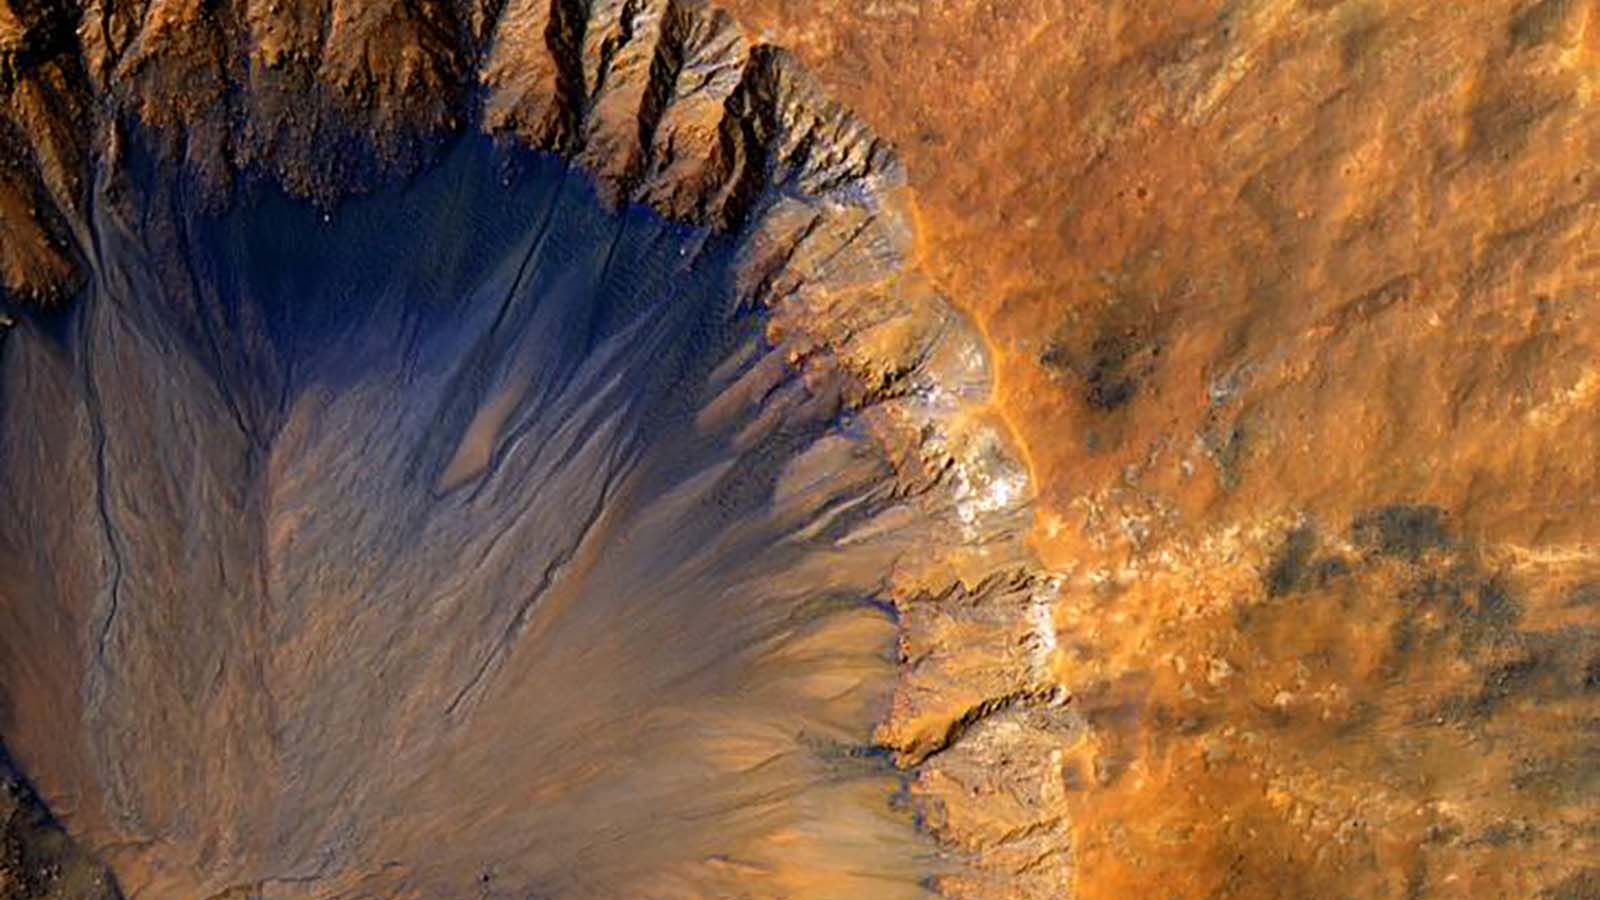 A Mars secret solved, a colossal comet, and mind fractals all in this week's science news thumbnail